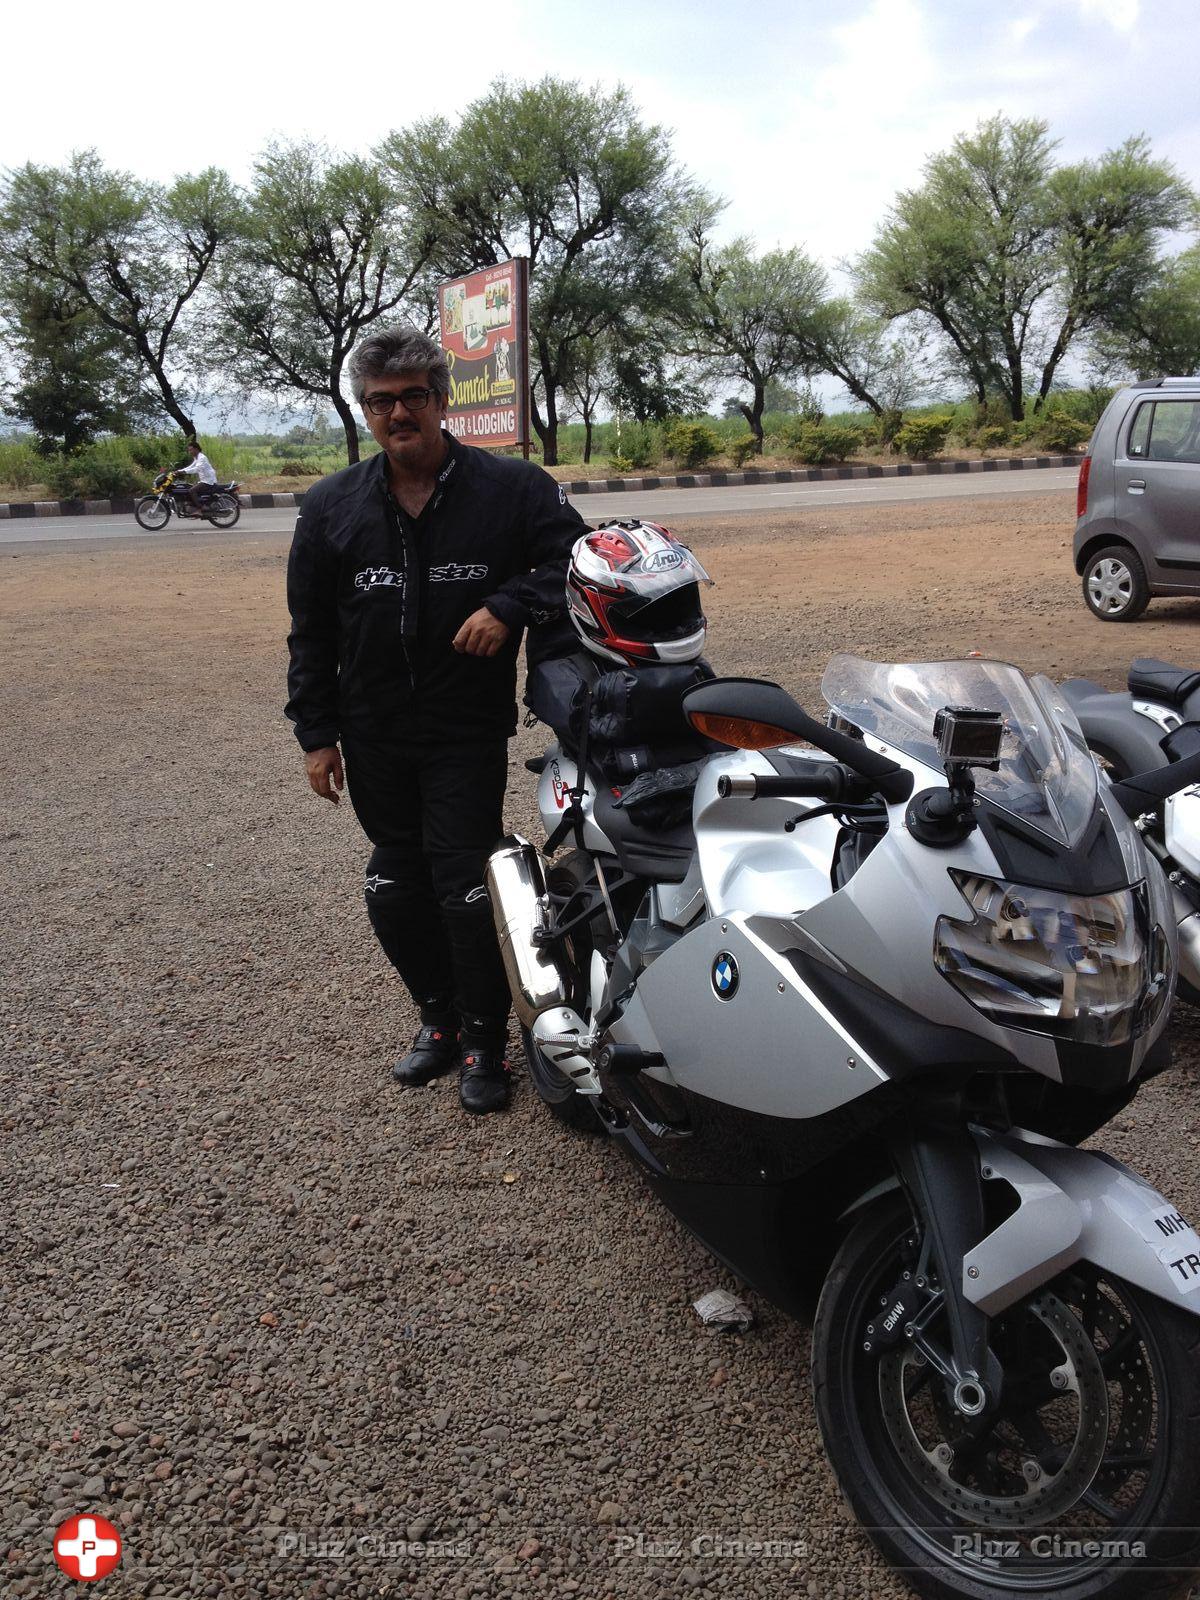 Ajith Kumar trip from Pune to Chennai in BMW K 1300 S bike Photos | Picture 607731